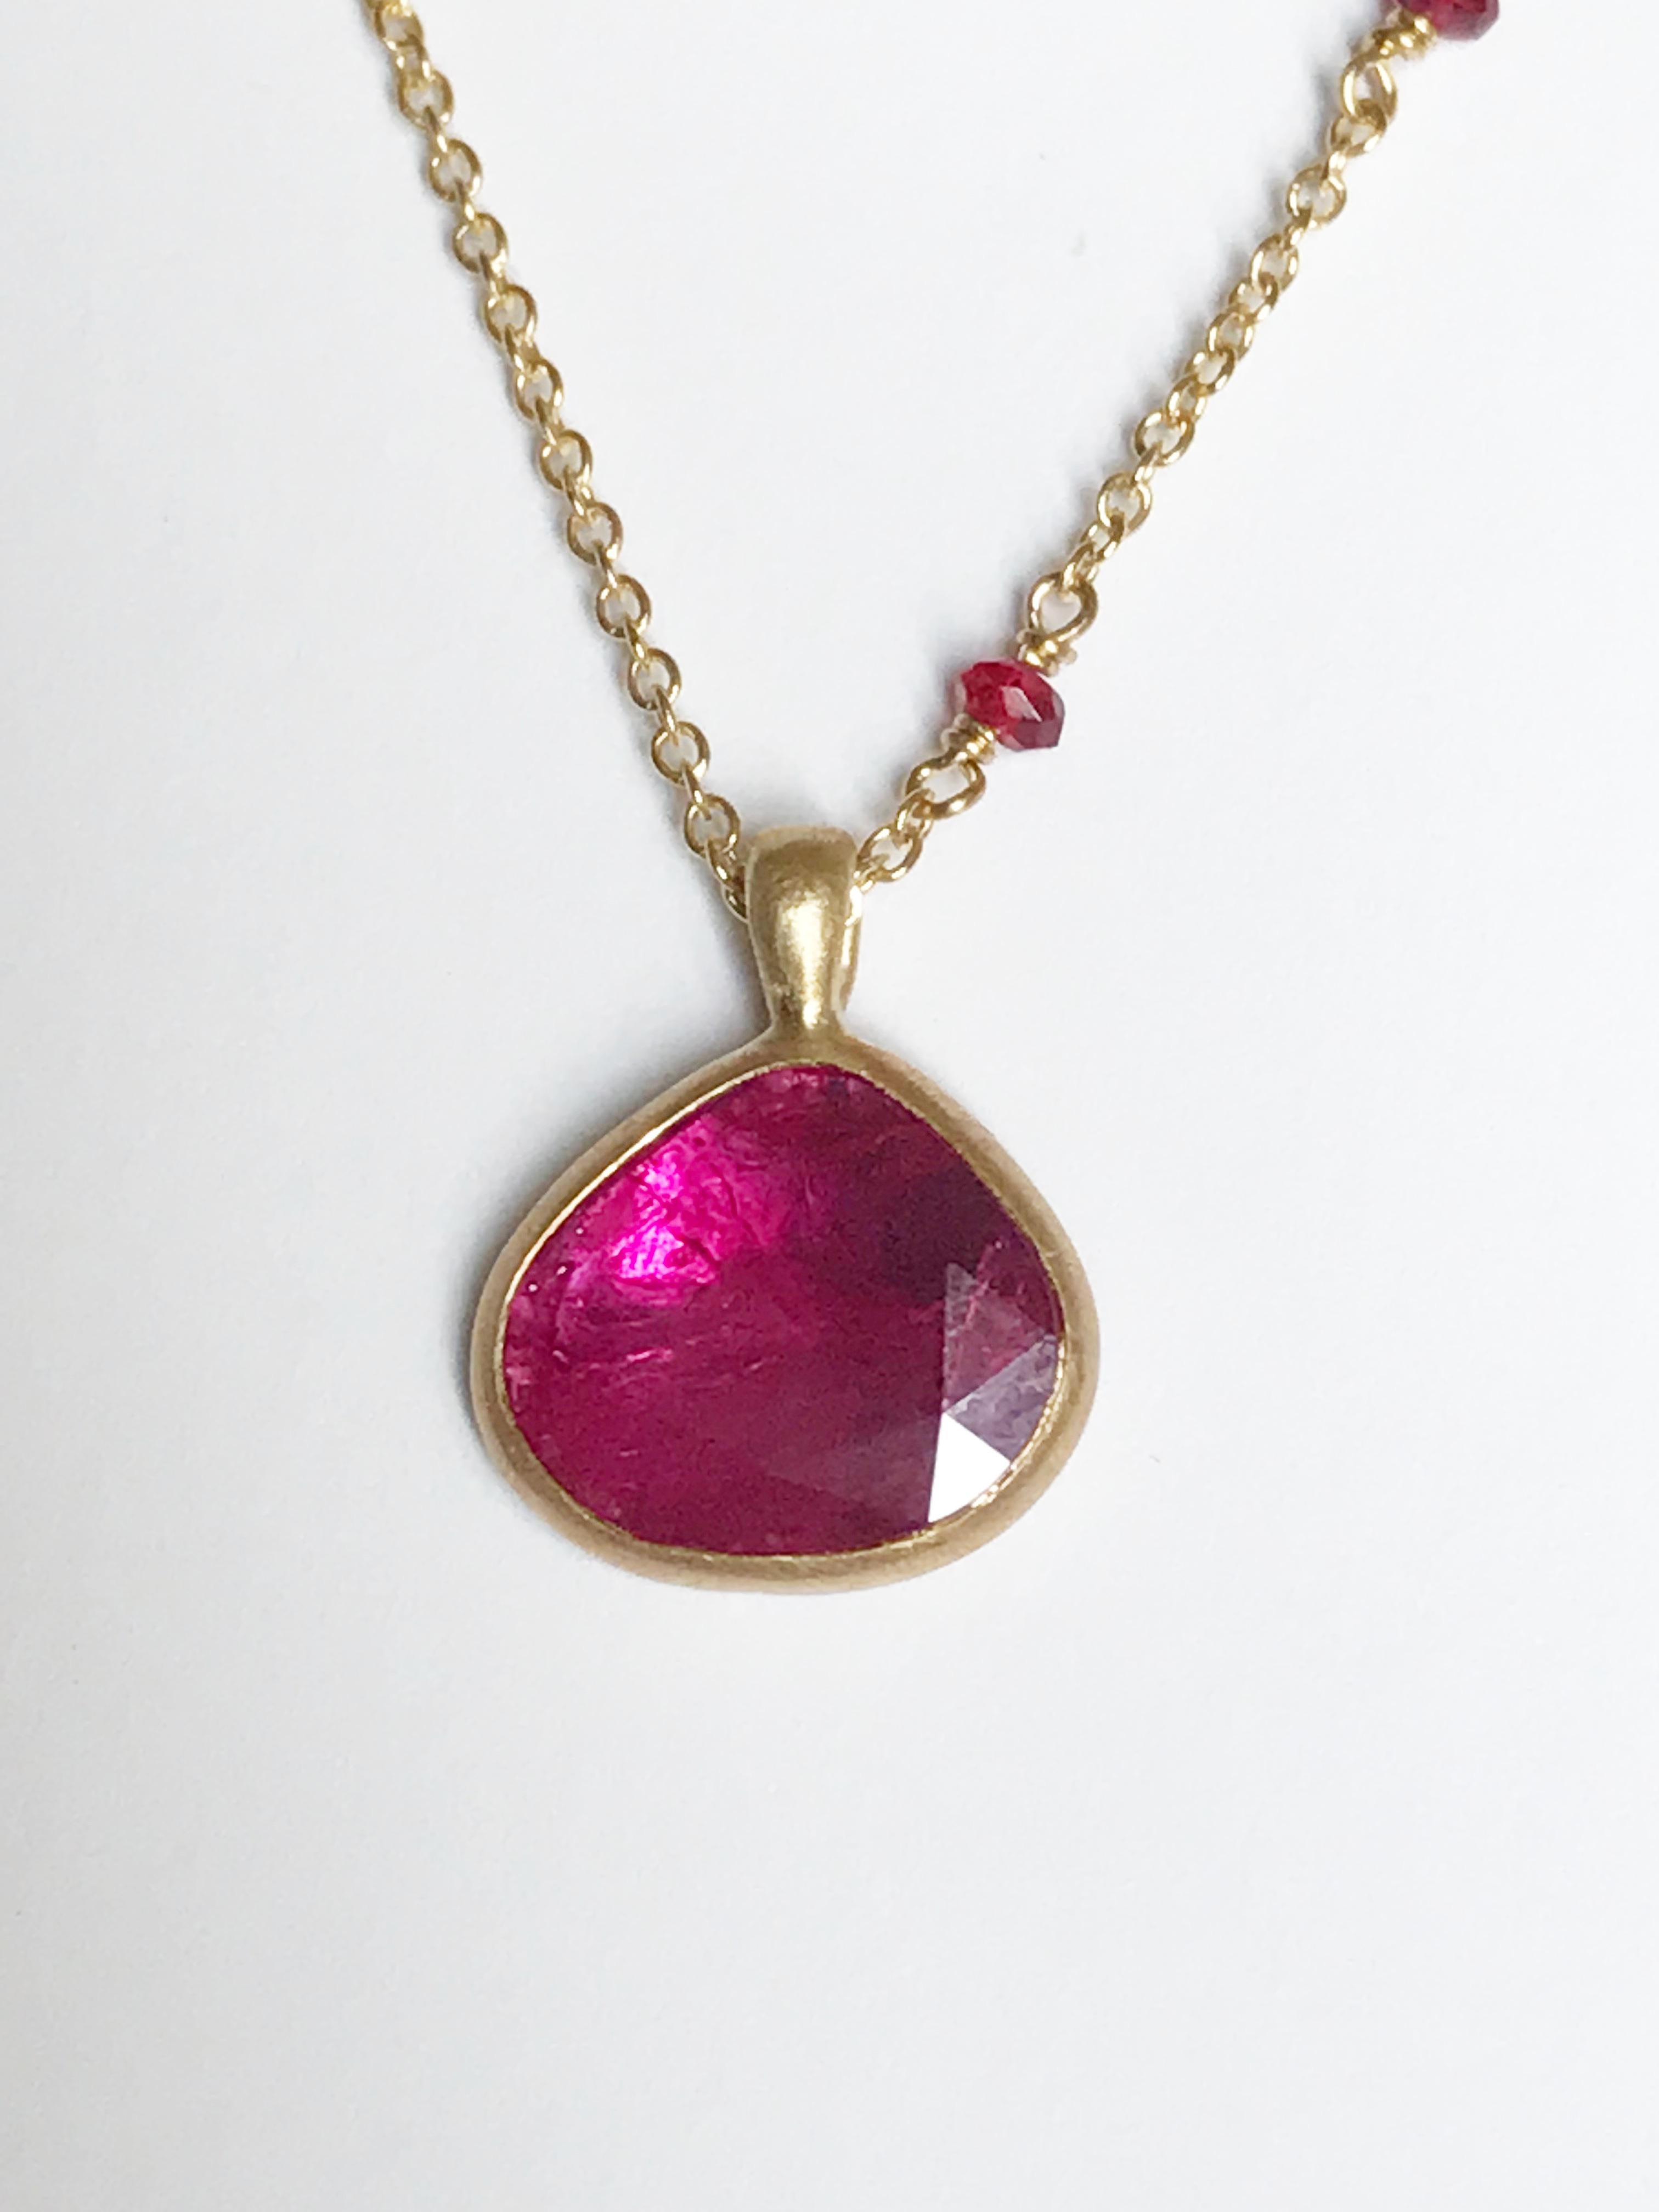 Dalben design One of a Kind 18k yellow gold matte finishing necklace with one bezel-set drop shape rose cut slice ruby weight 1,4 carat. 
pendant dimension : 
width 11,3 mm 
height 11 mm 
The chain is alternated with red spinel faceted bead mounted